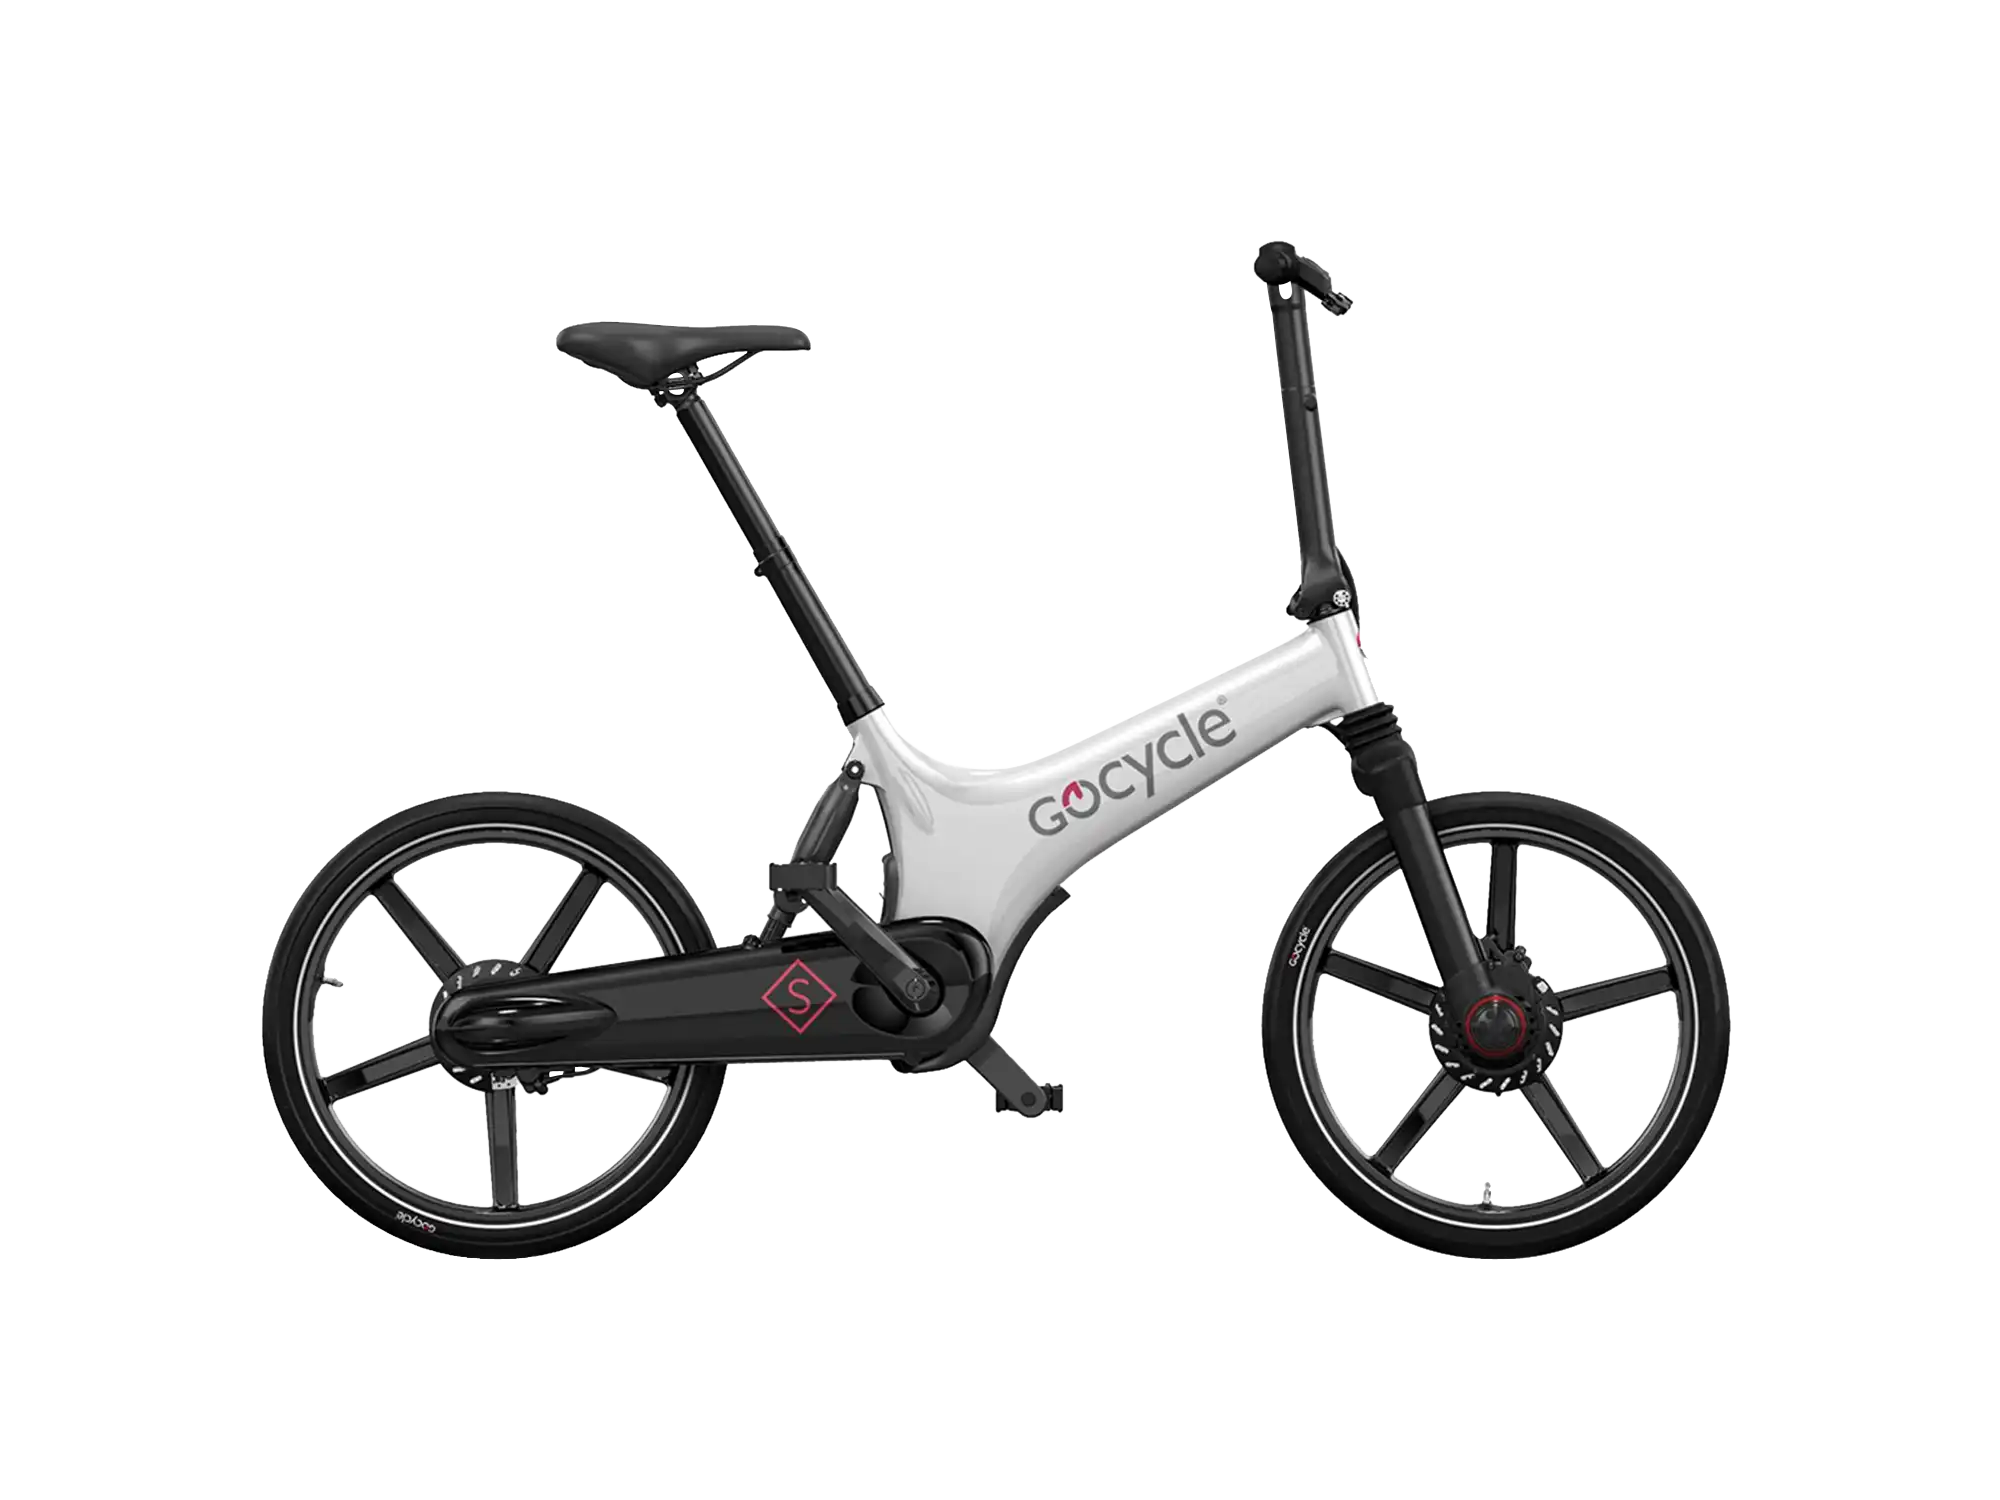 2017 Gocycle GS Review